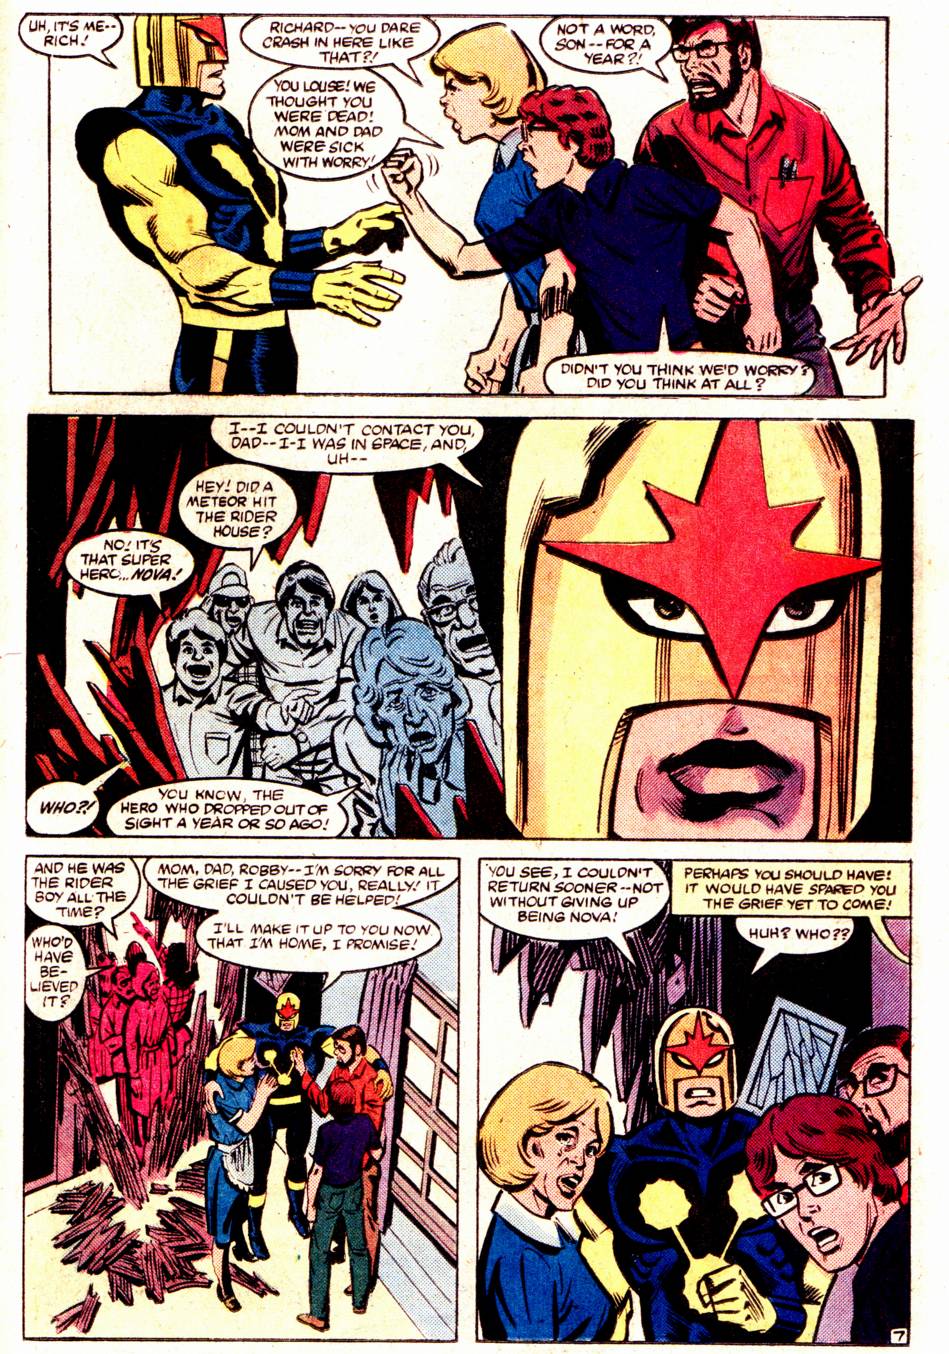 What If? (1977) issue 36 - The Fantastic Four Had Not Gained Their Powers - Page 28